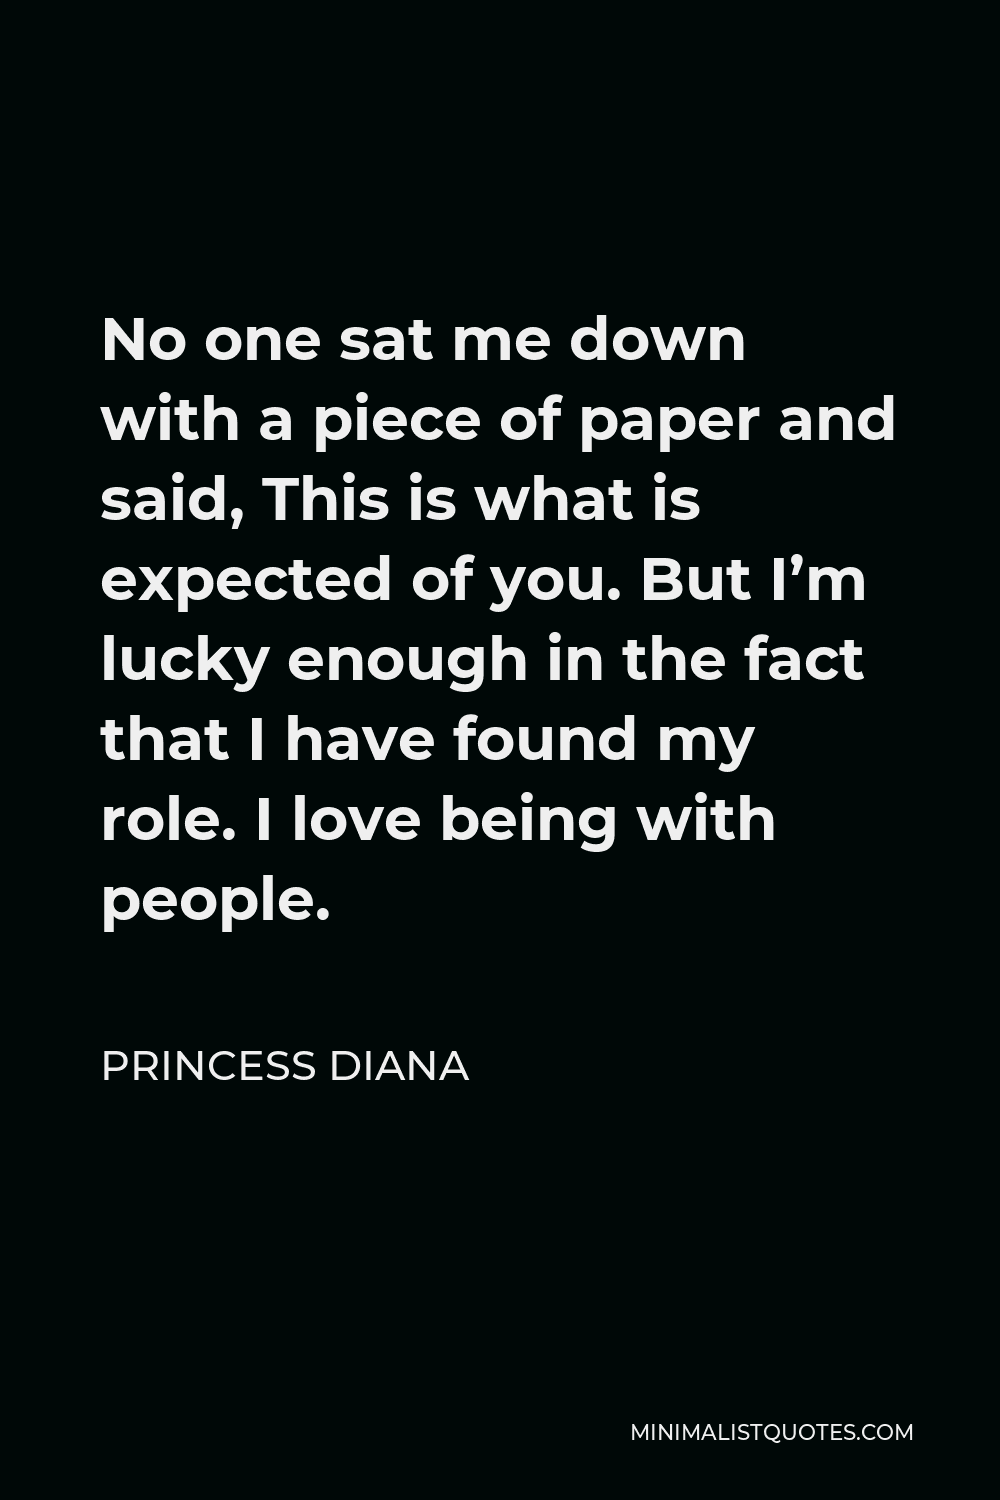 Princess Diana Quote - No one sat me down with a piece of paper and said, This is what is expected of you. But I’m lucky enough in the fact that I have found my role. I love being with people.